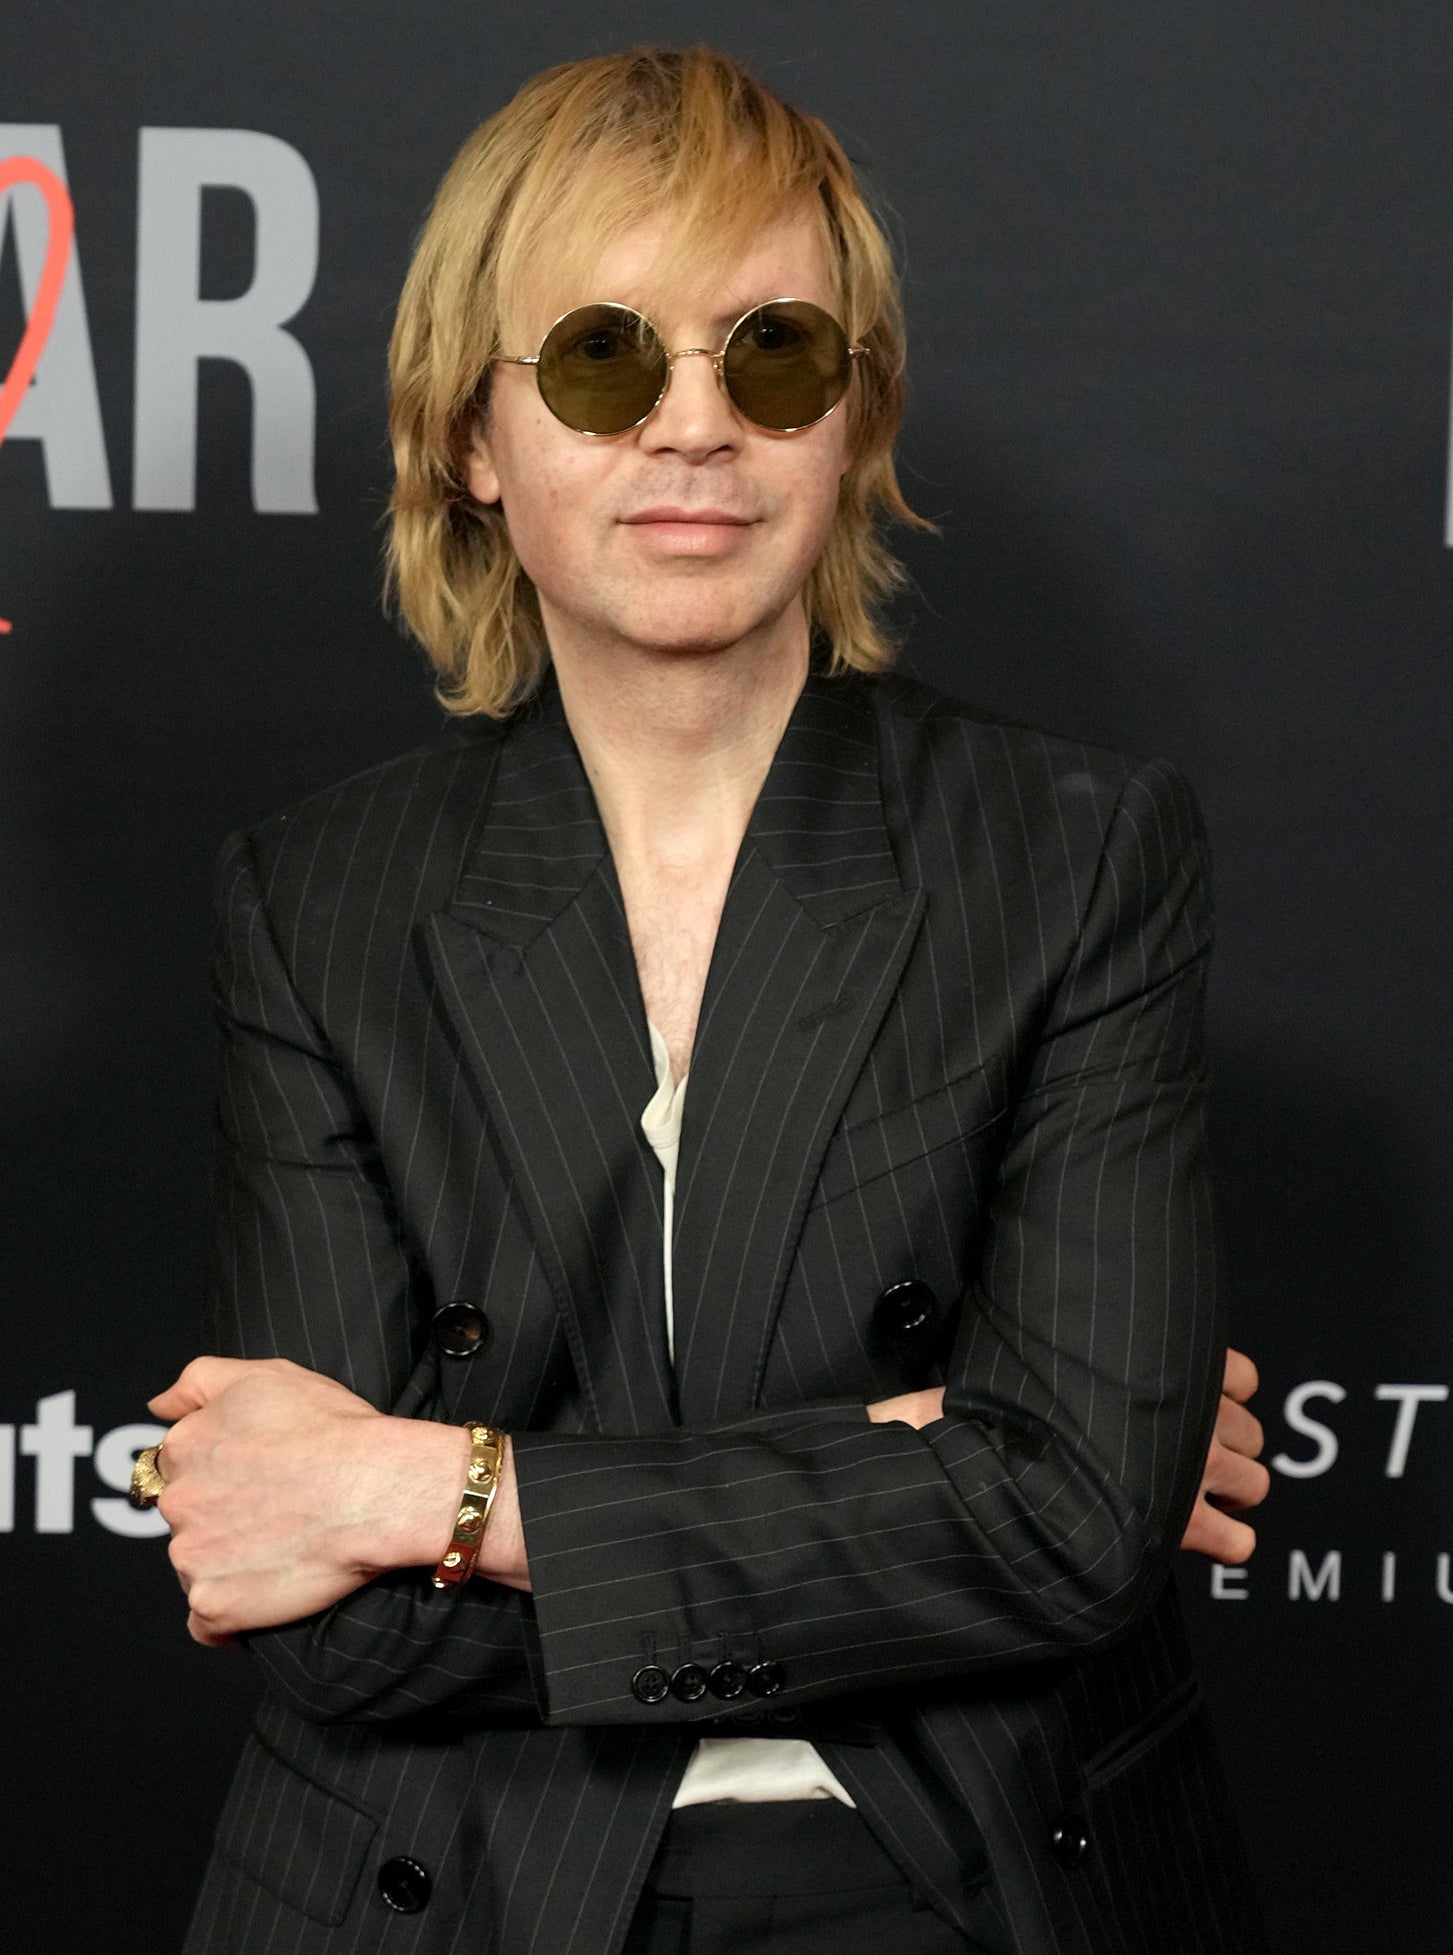 Beck in sunglasses and a suit